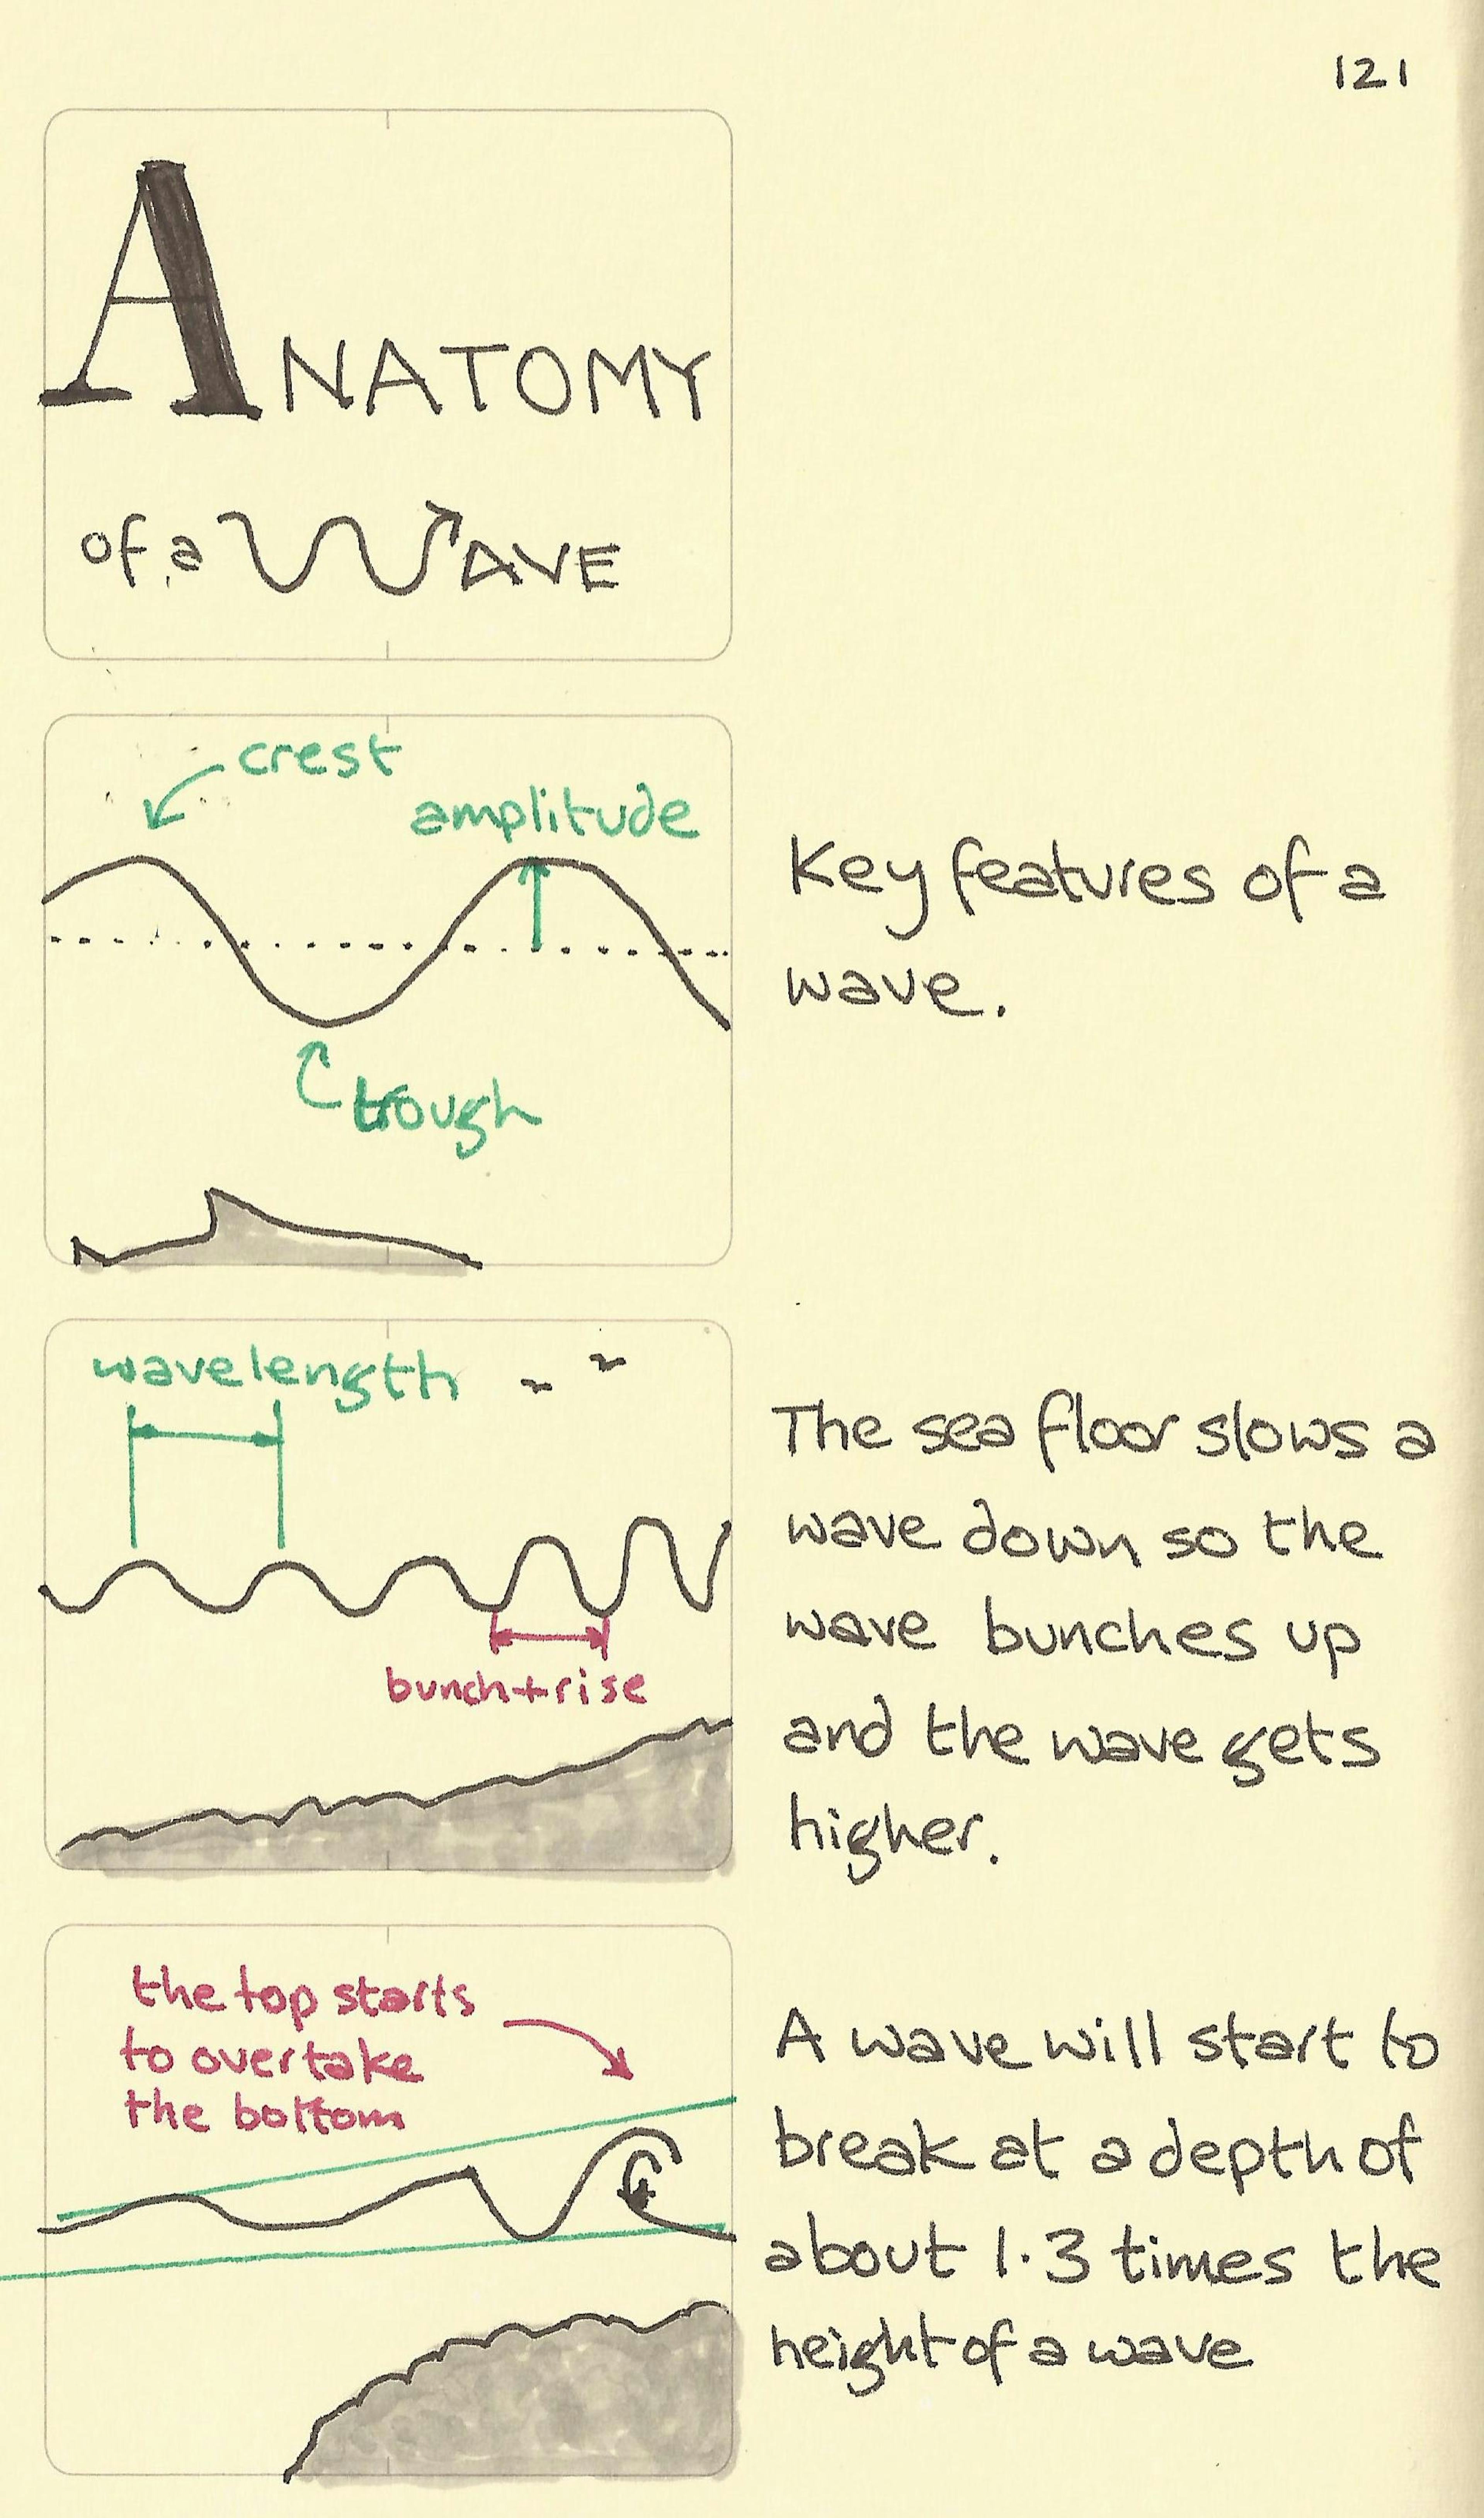 Anatomy of a wave illustration showing the key features of crest, amplitude, trough, wavelength and when it starts to break on a beach